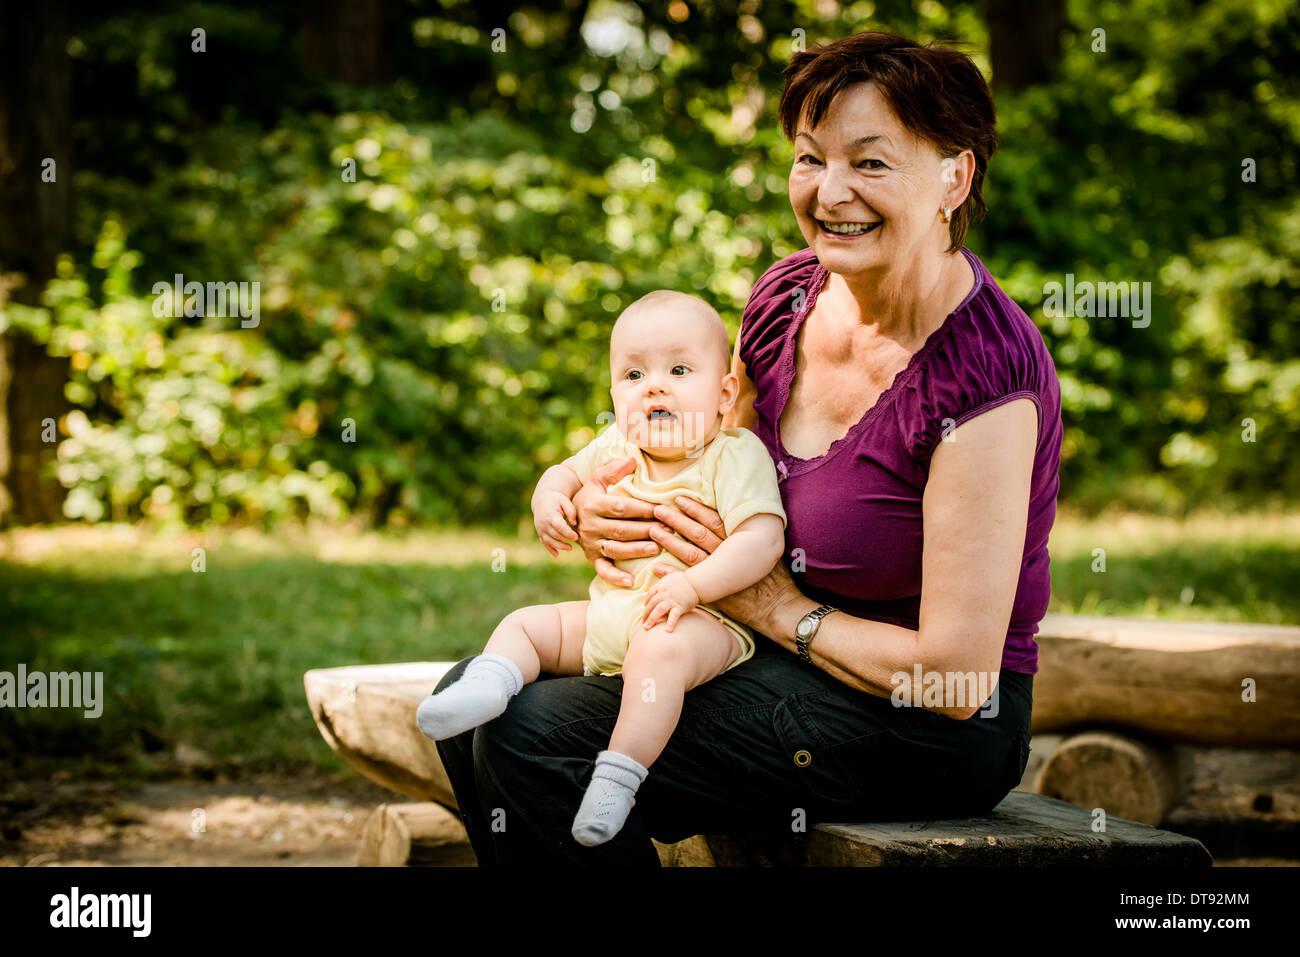 Grandmother with grandchild - senior woman sitting with her granddaughter on bench outdoor in nature Stock Photo